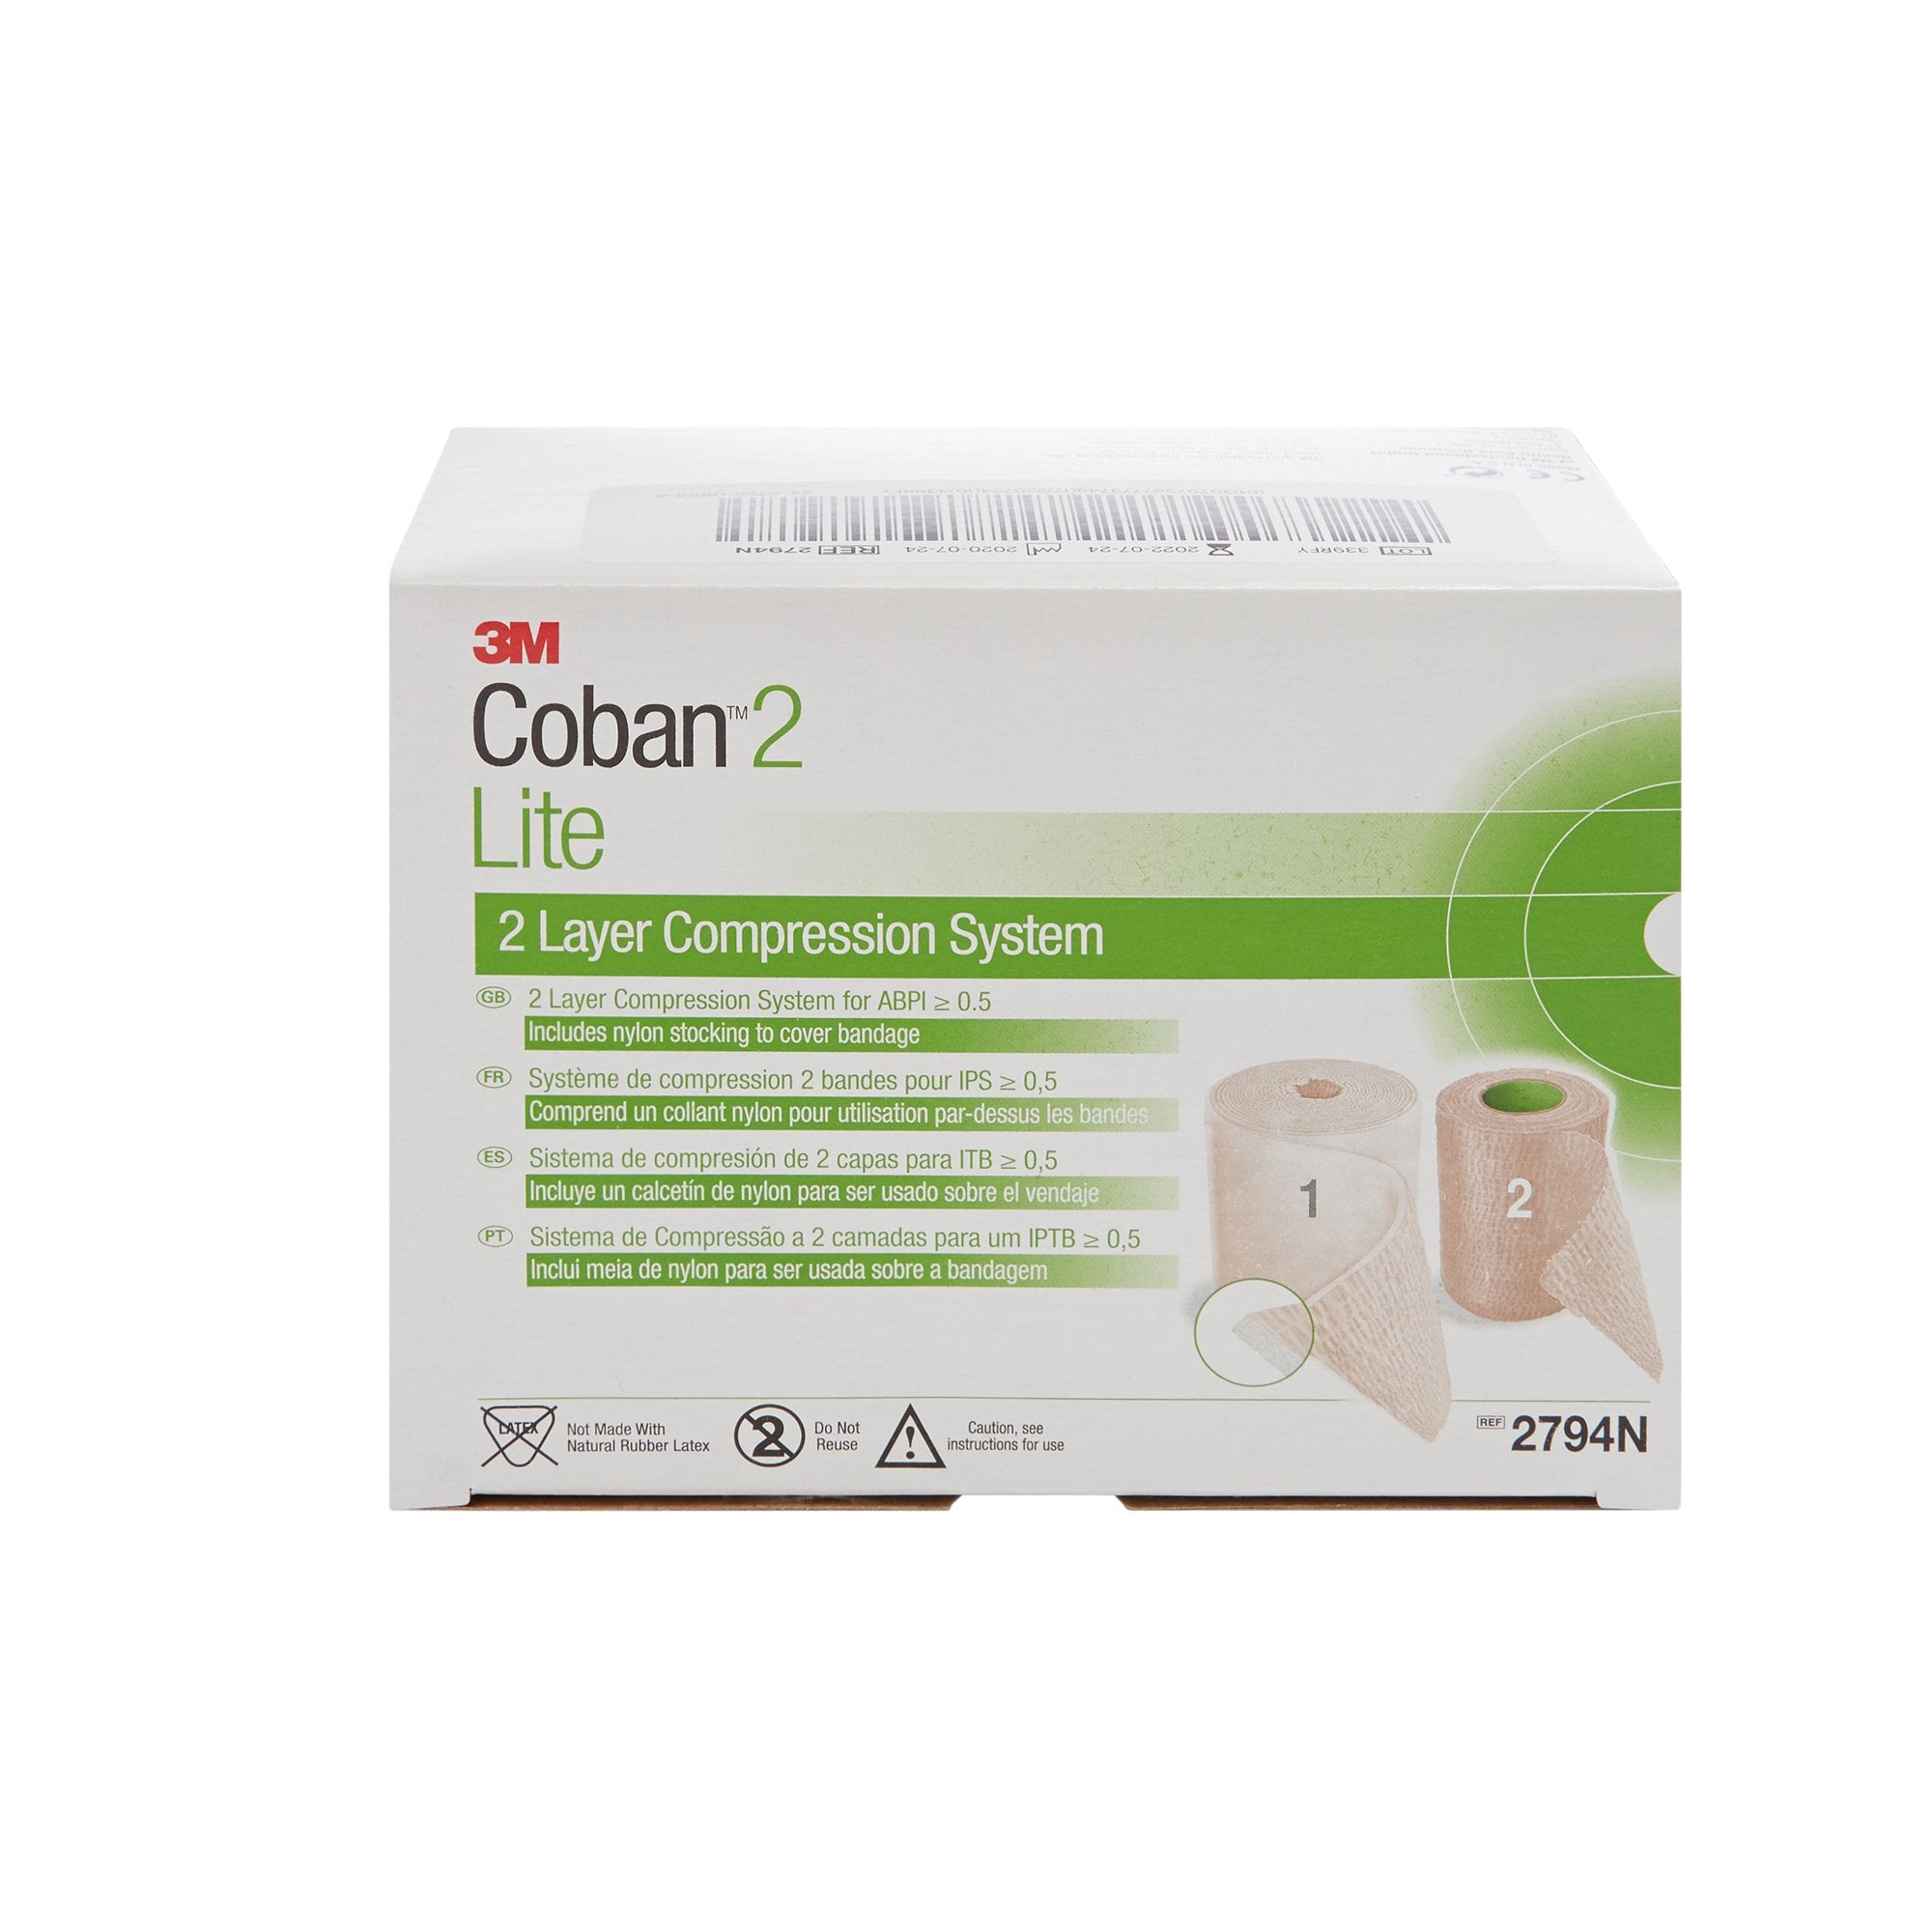 2 Layer Compression Bandage System 3M™ Coban™2 Lite 4 Inch X 2-9/10 Yard / 4 Inch X 5-1/10 Yard Self-Adherent / Pull On Closure Tan / White NonSterile 25 to 30 mmHg